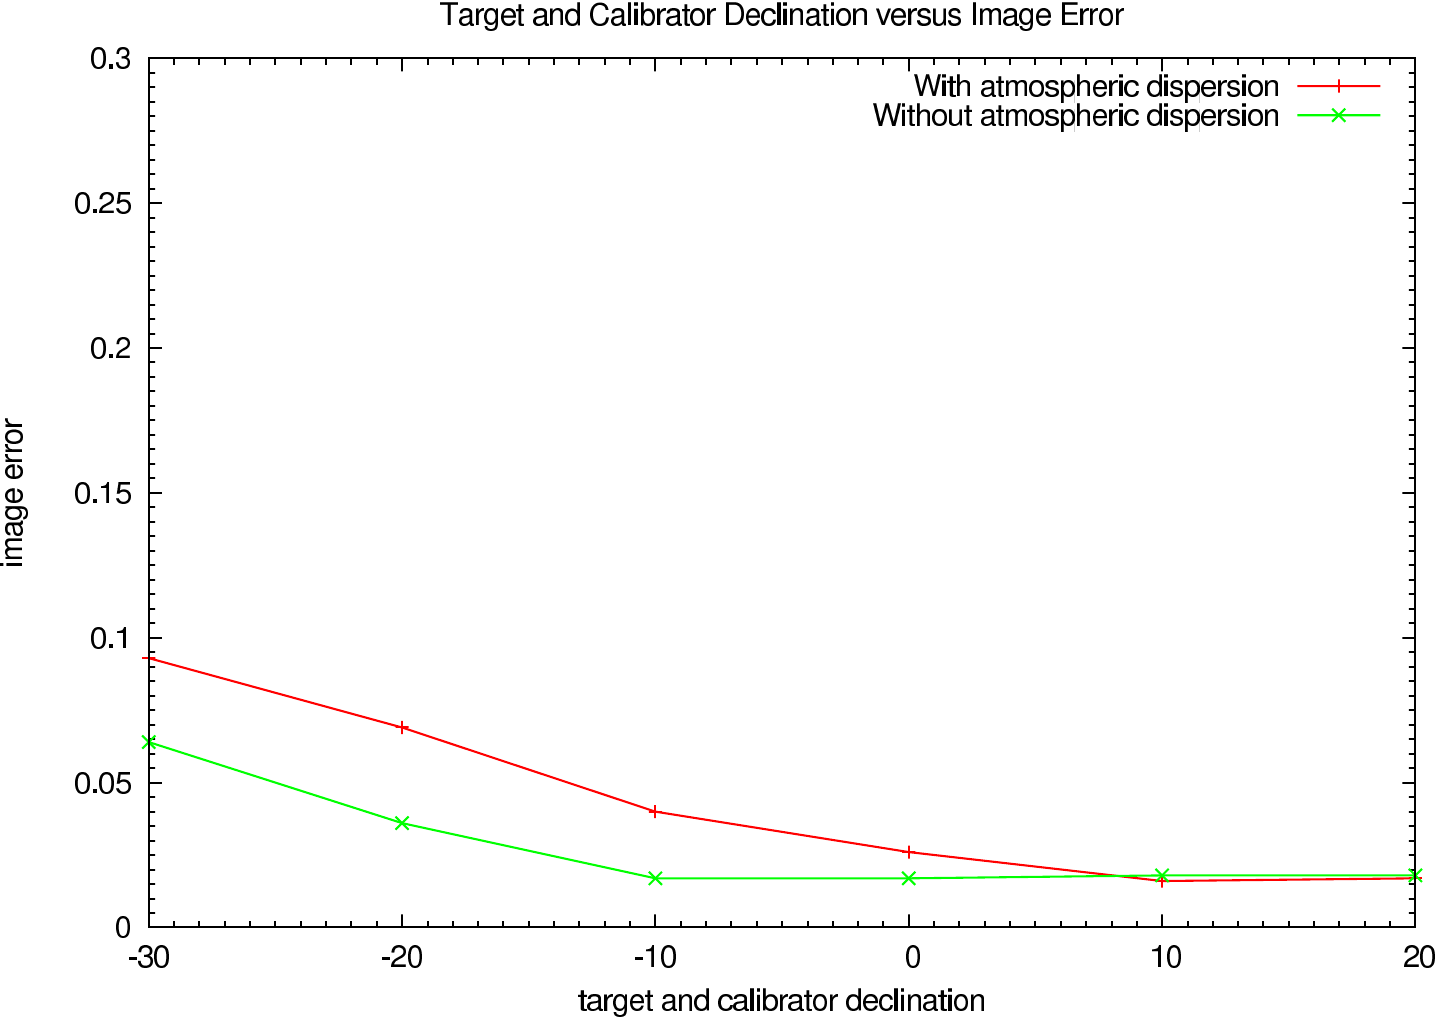 K-Band reconstruction image errors depending on the atmospheric dispersion (Building-Block)